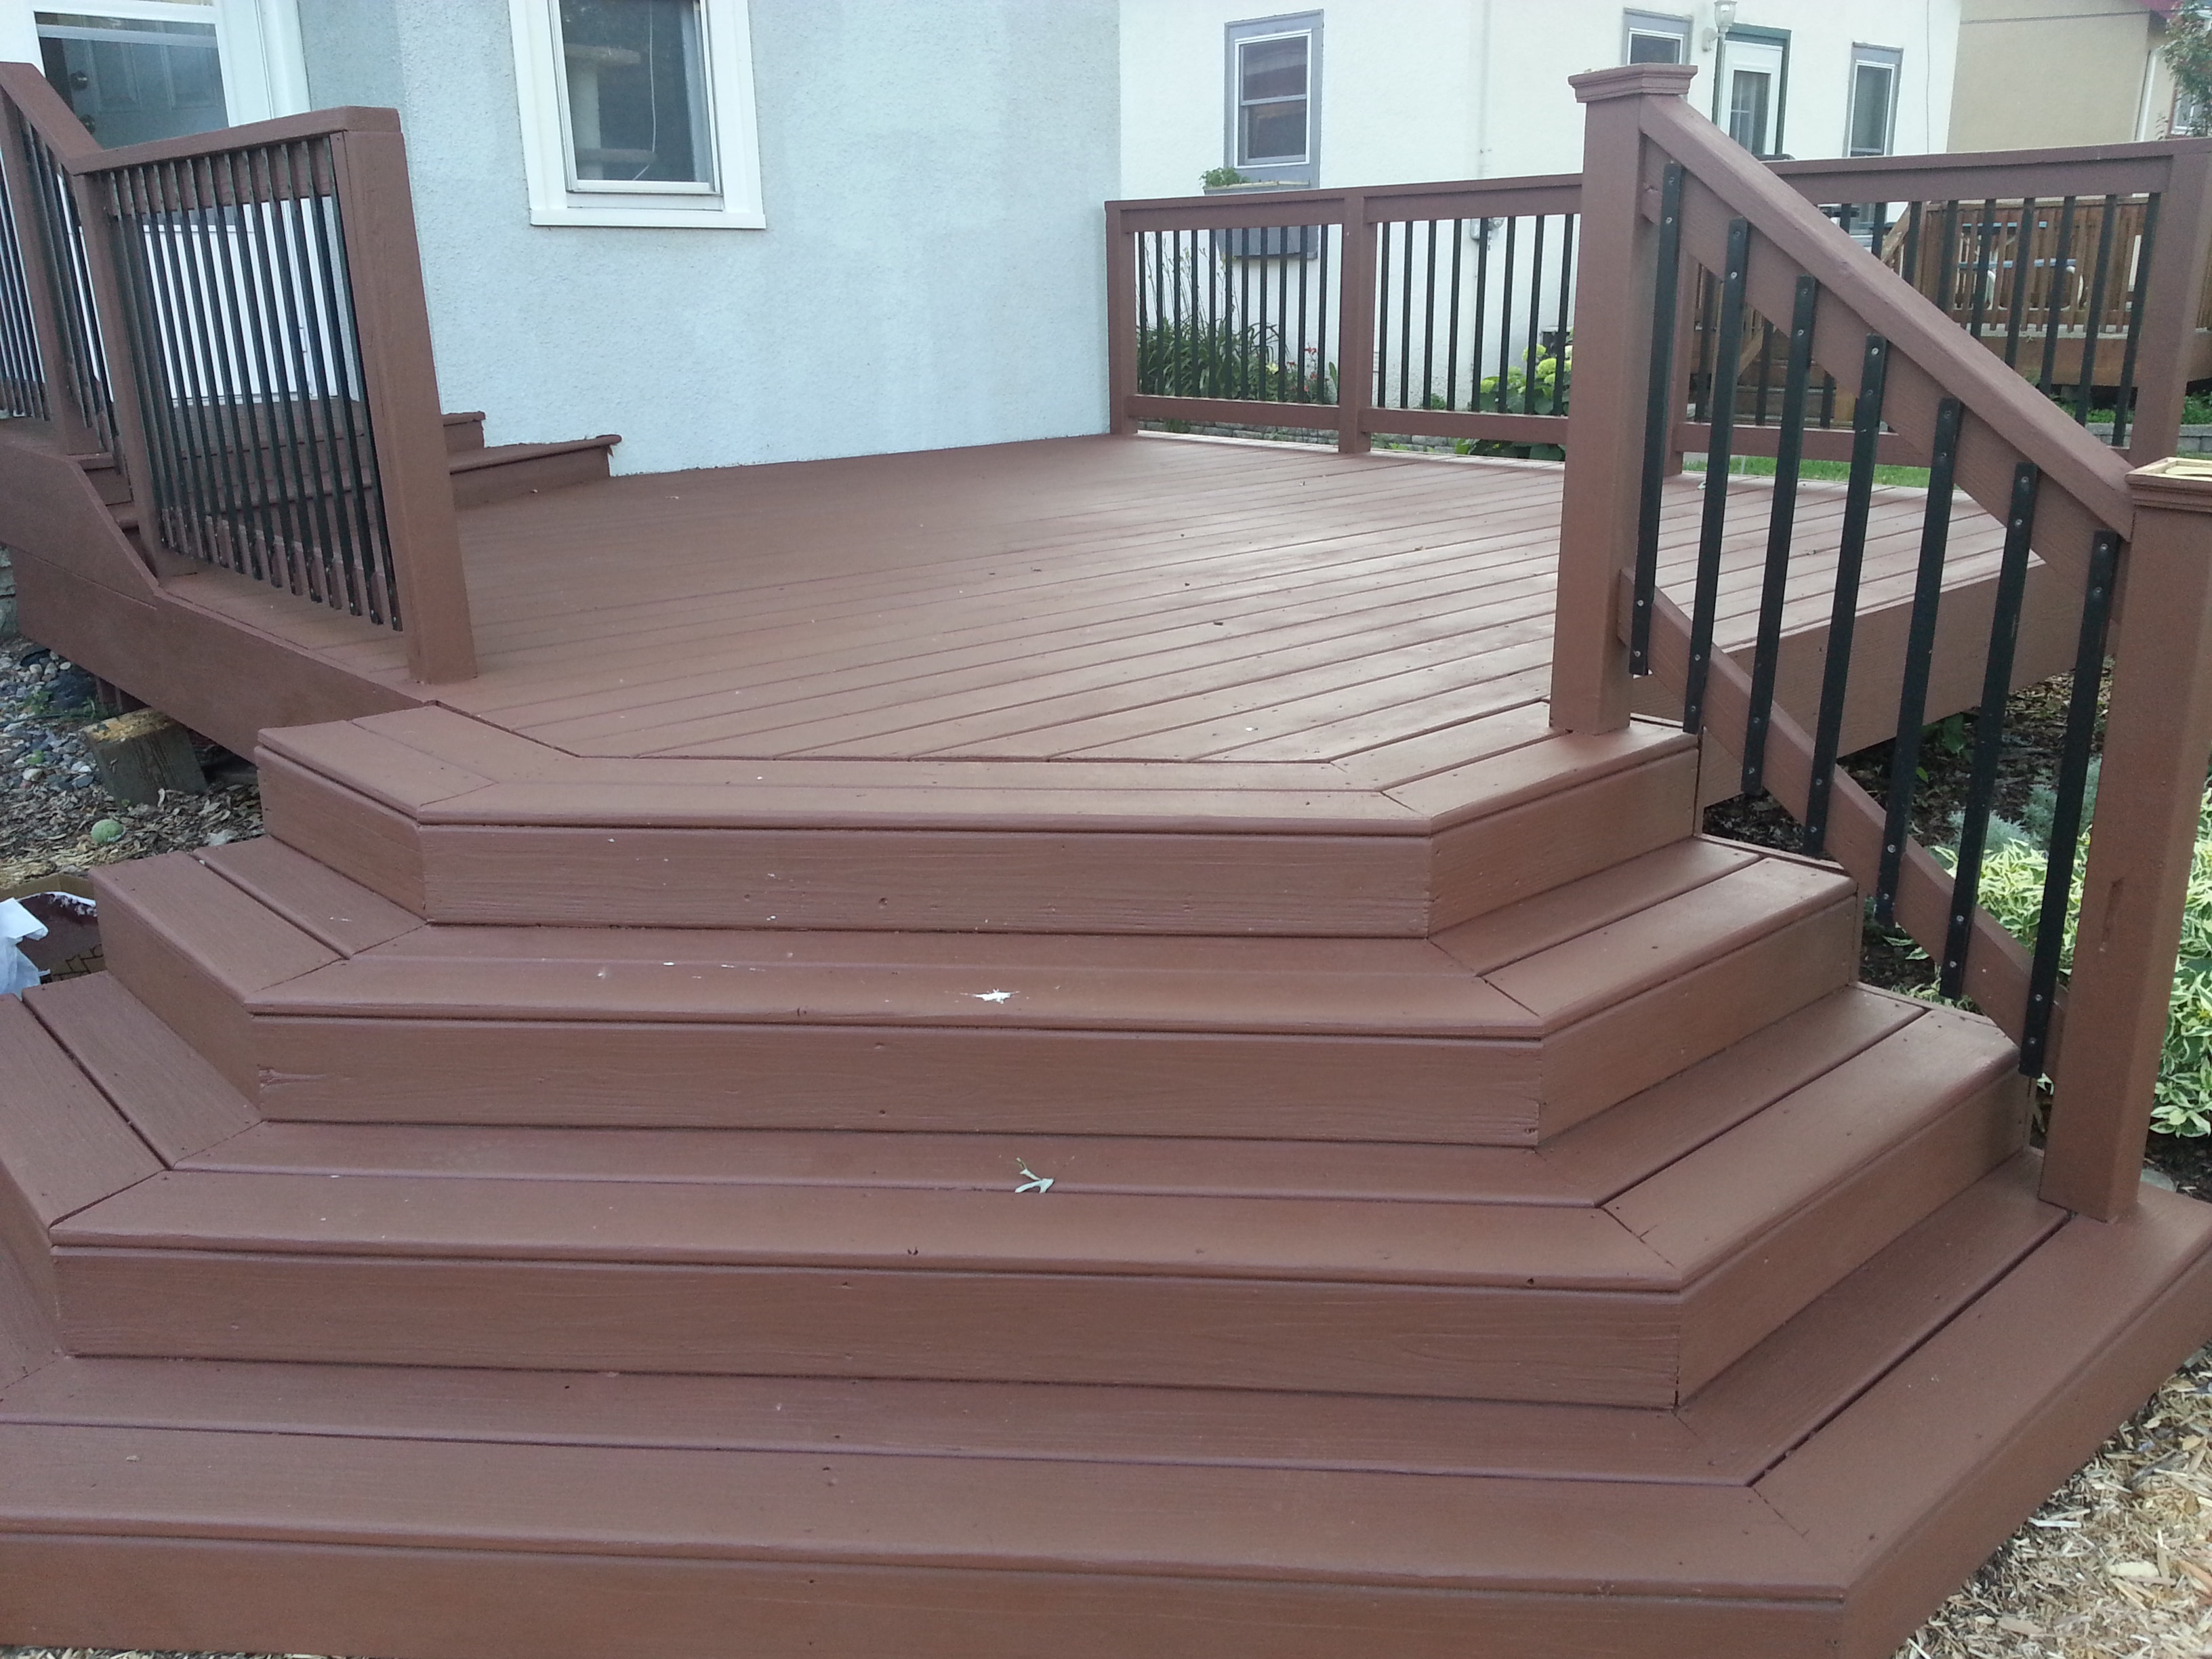 Decking Bring New Life To Old Wood With Behr Deckover Colors in sizing 3264 X 2448